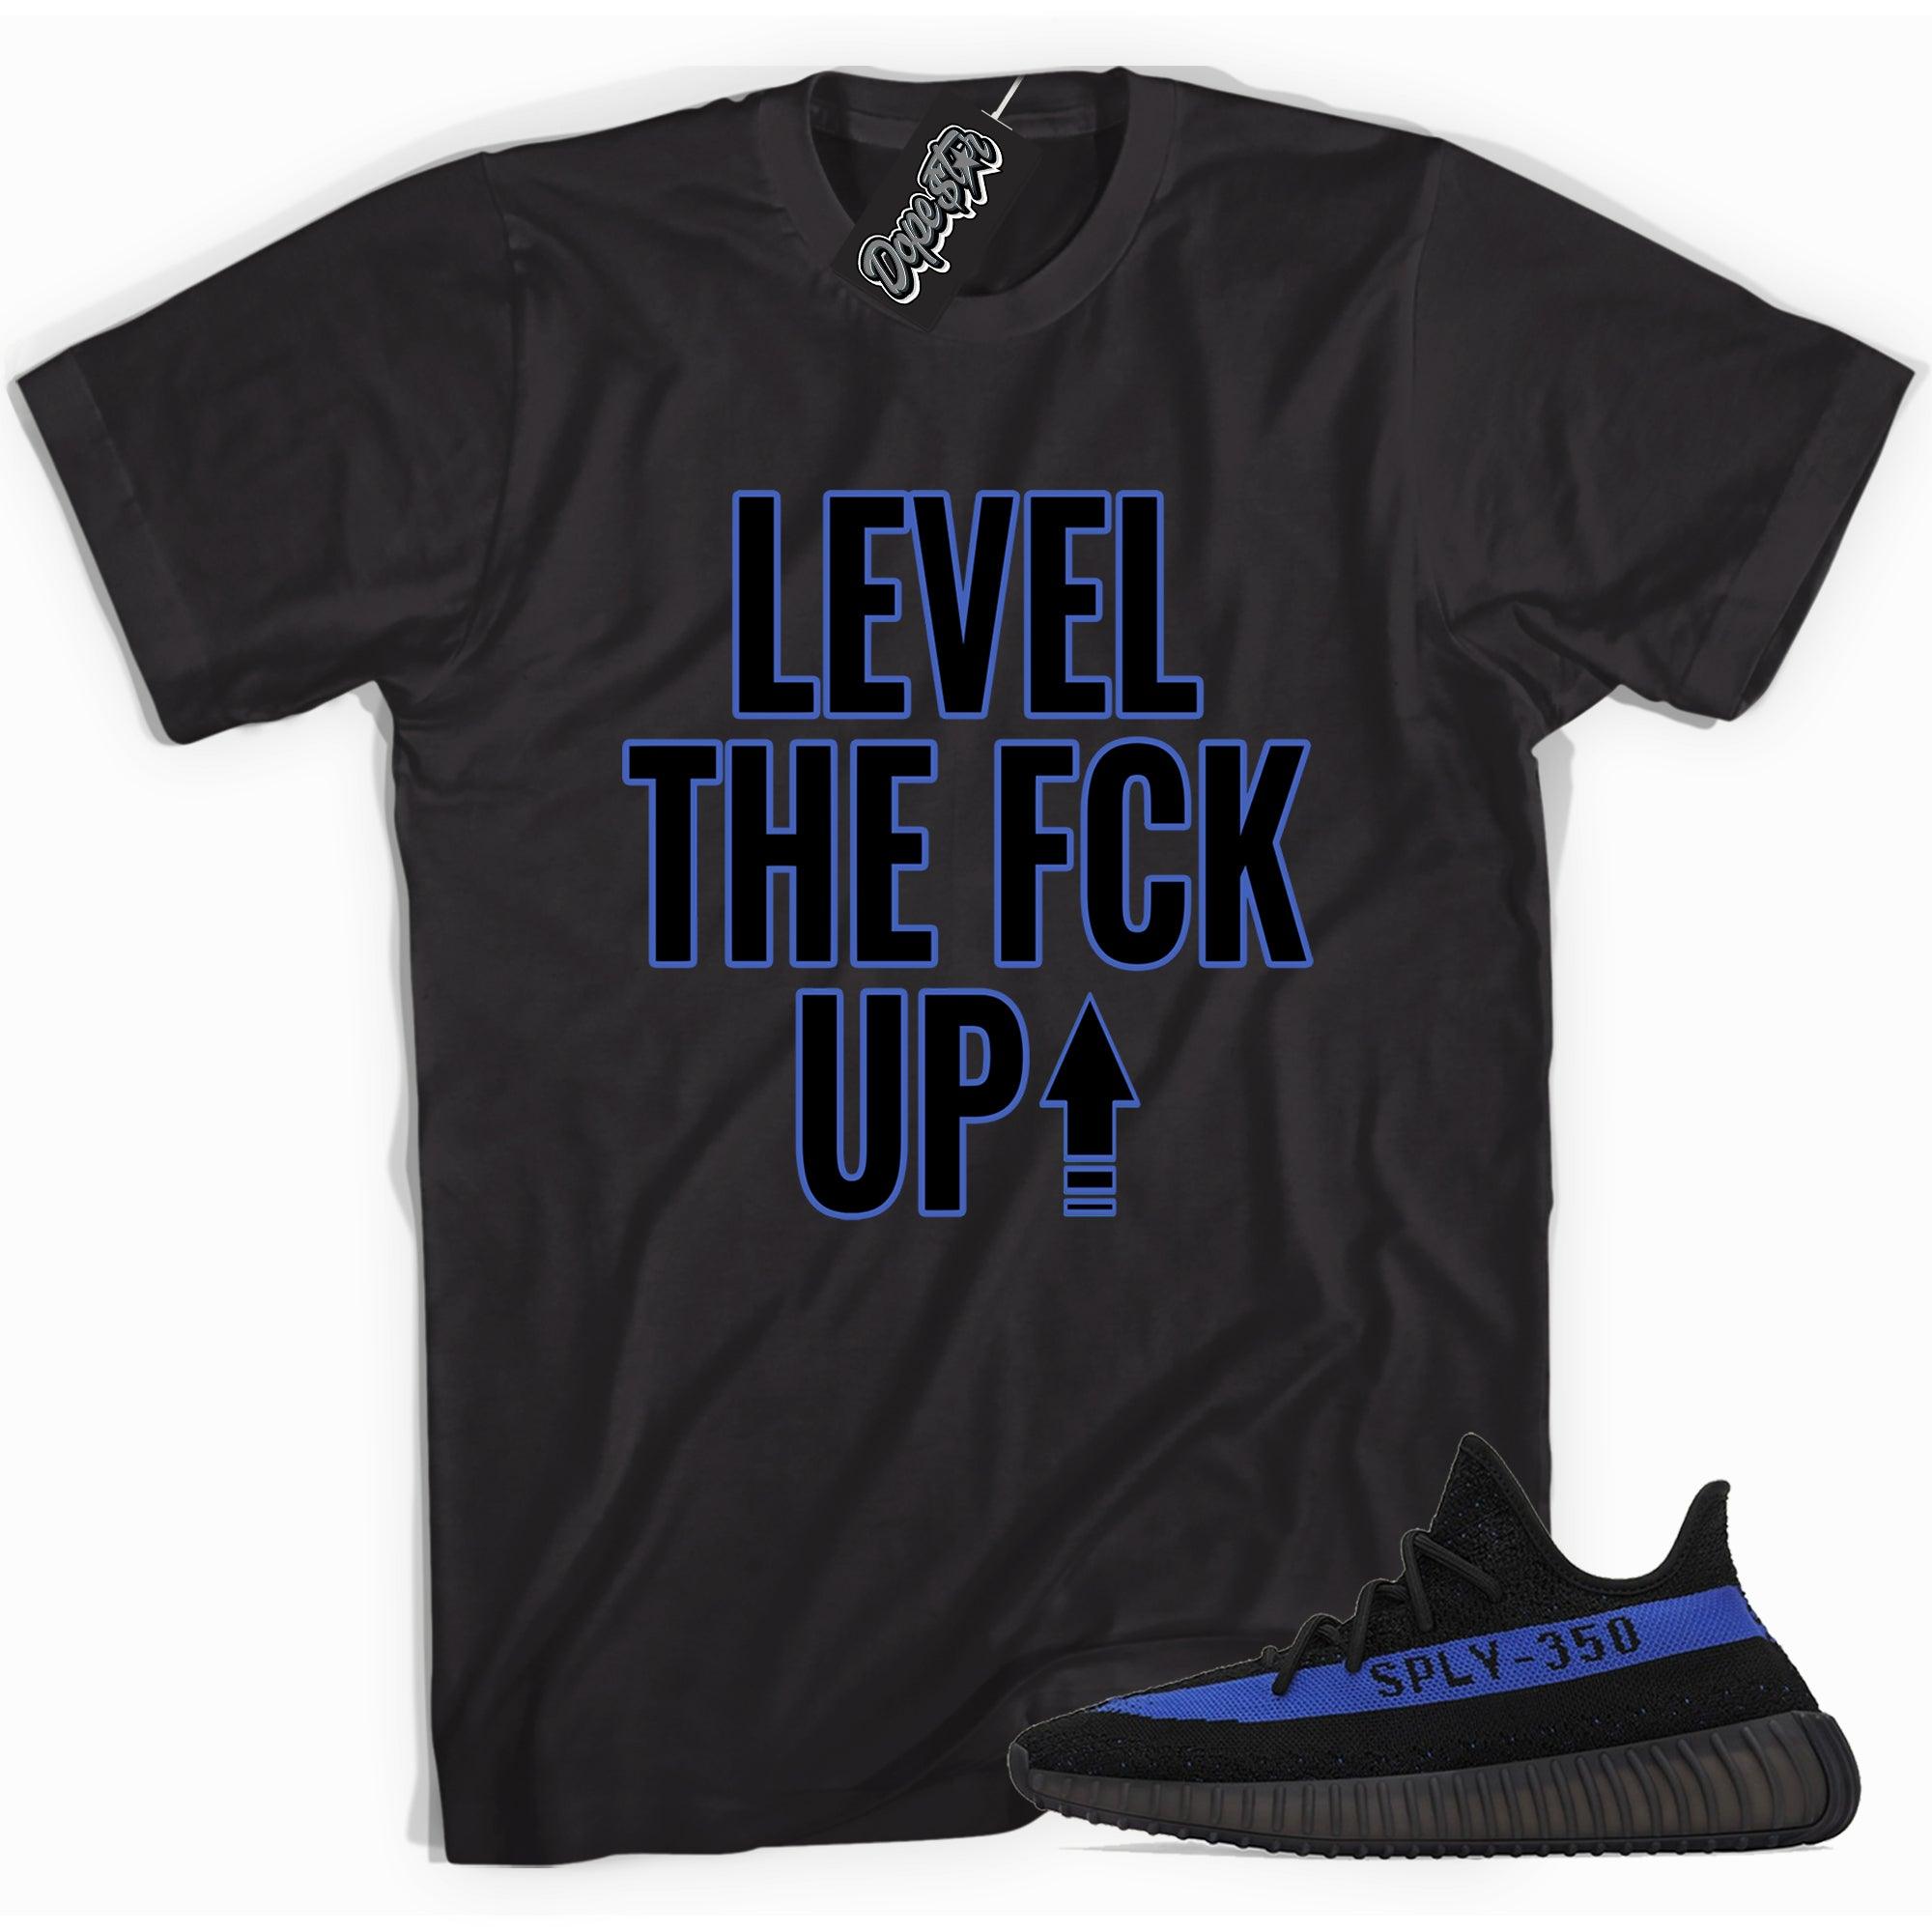 Cool black graphic tee with 'Level Up' print, that perfectly matches Yeezy Boost 350 V2 Dazzling Blue Toe sneakers.